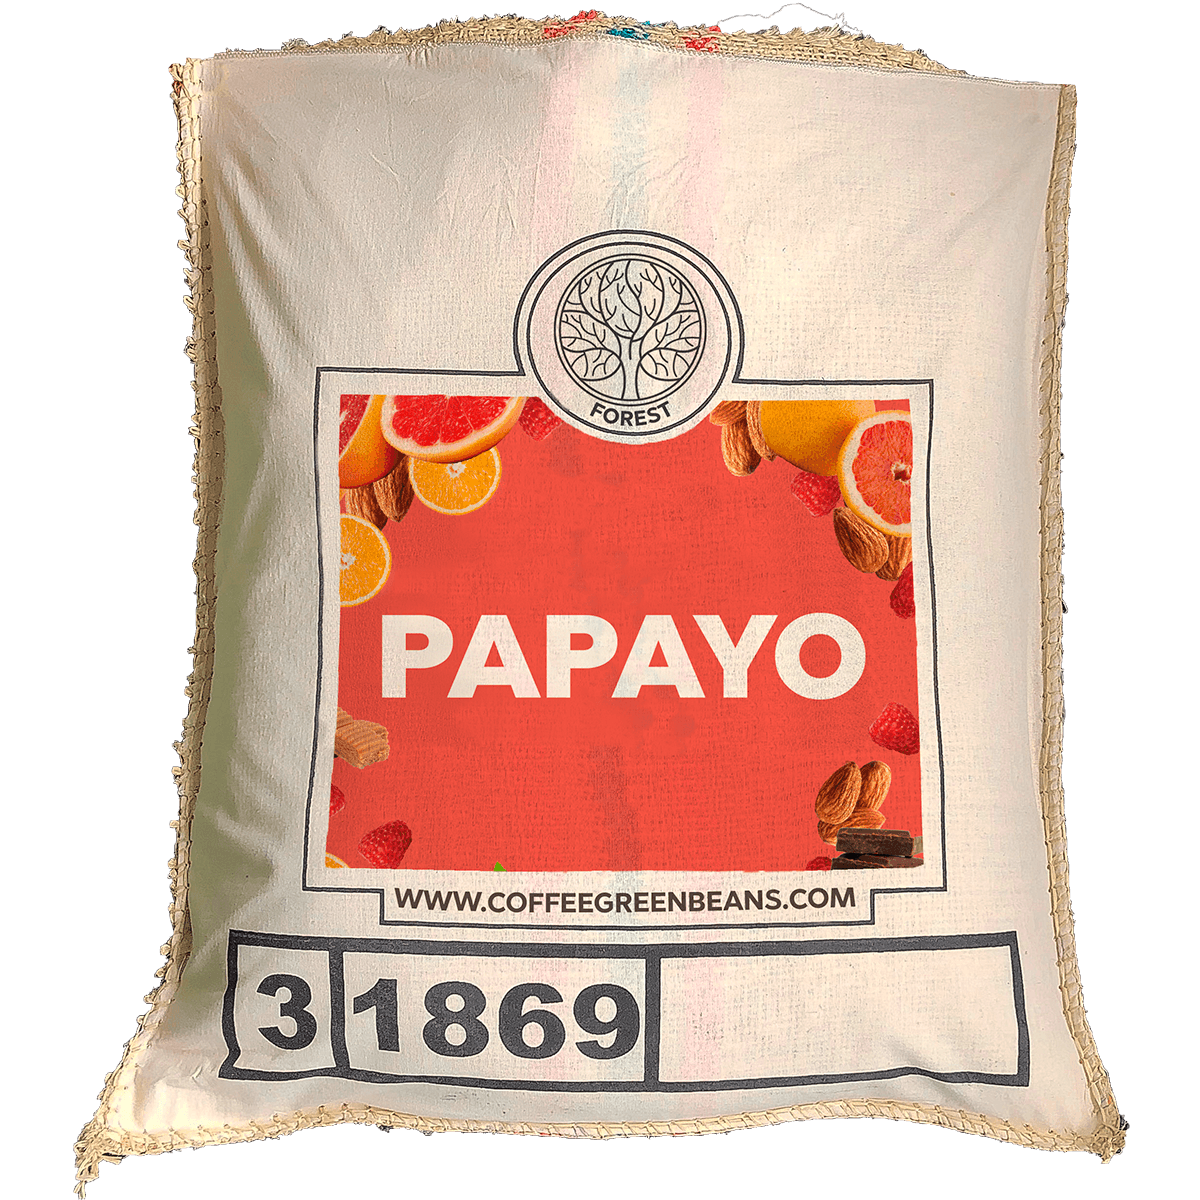 PAPAYO - Forest Coffee 